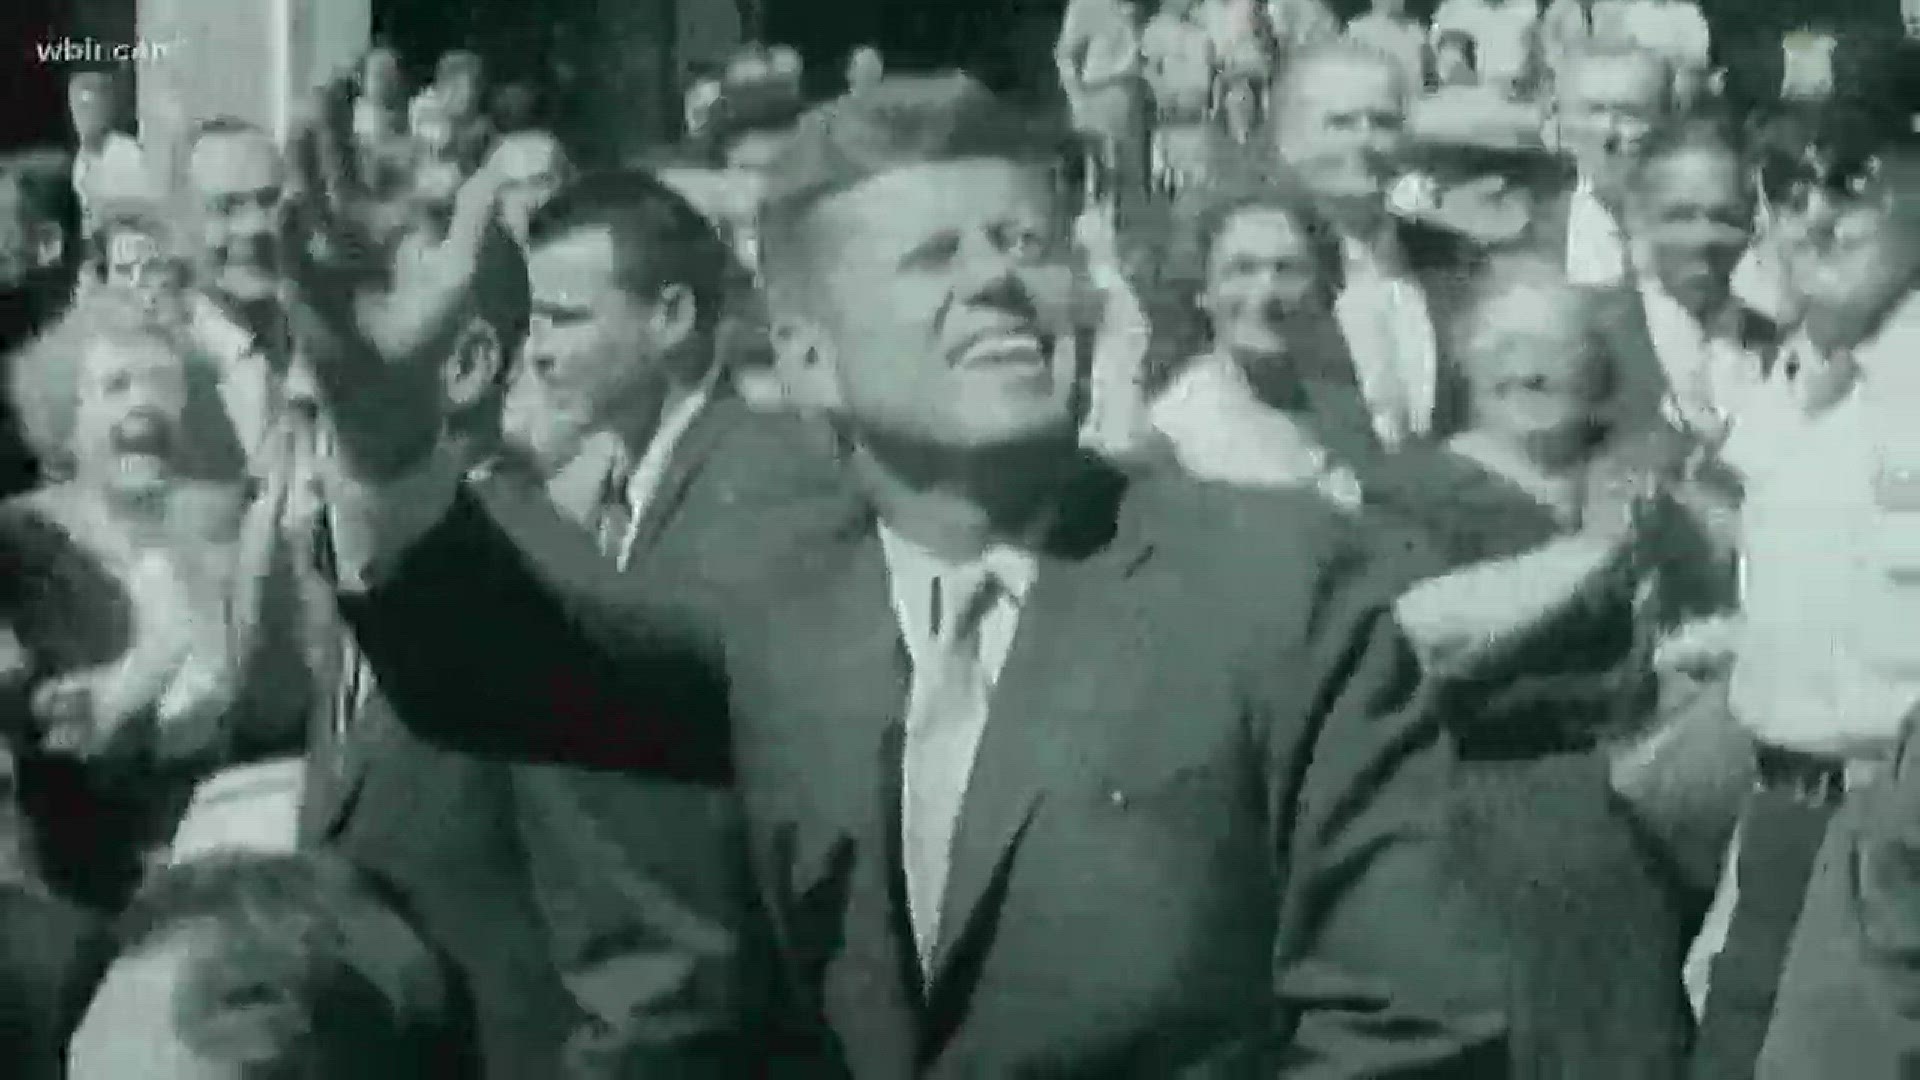 Oct. 26, 2017: 2,800 secret government documents about the assassination of President John F. Kennedy are now public, and the new information brings a lot of new questions. The question is, will the newly released documents clear up the lingering questions? Maryville College Political Science Professor Mark O’Gorman said some people may just want some sort of closure on the case.